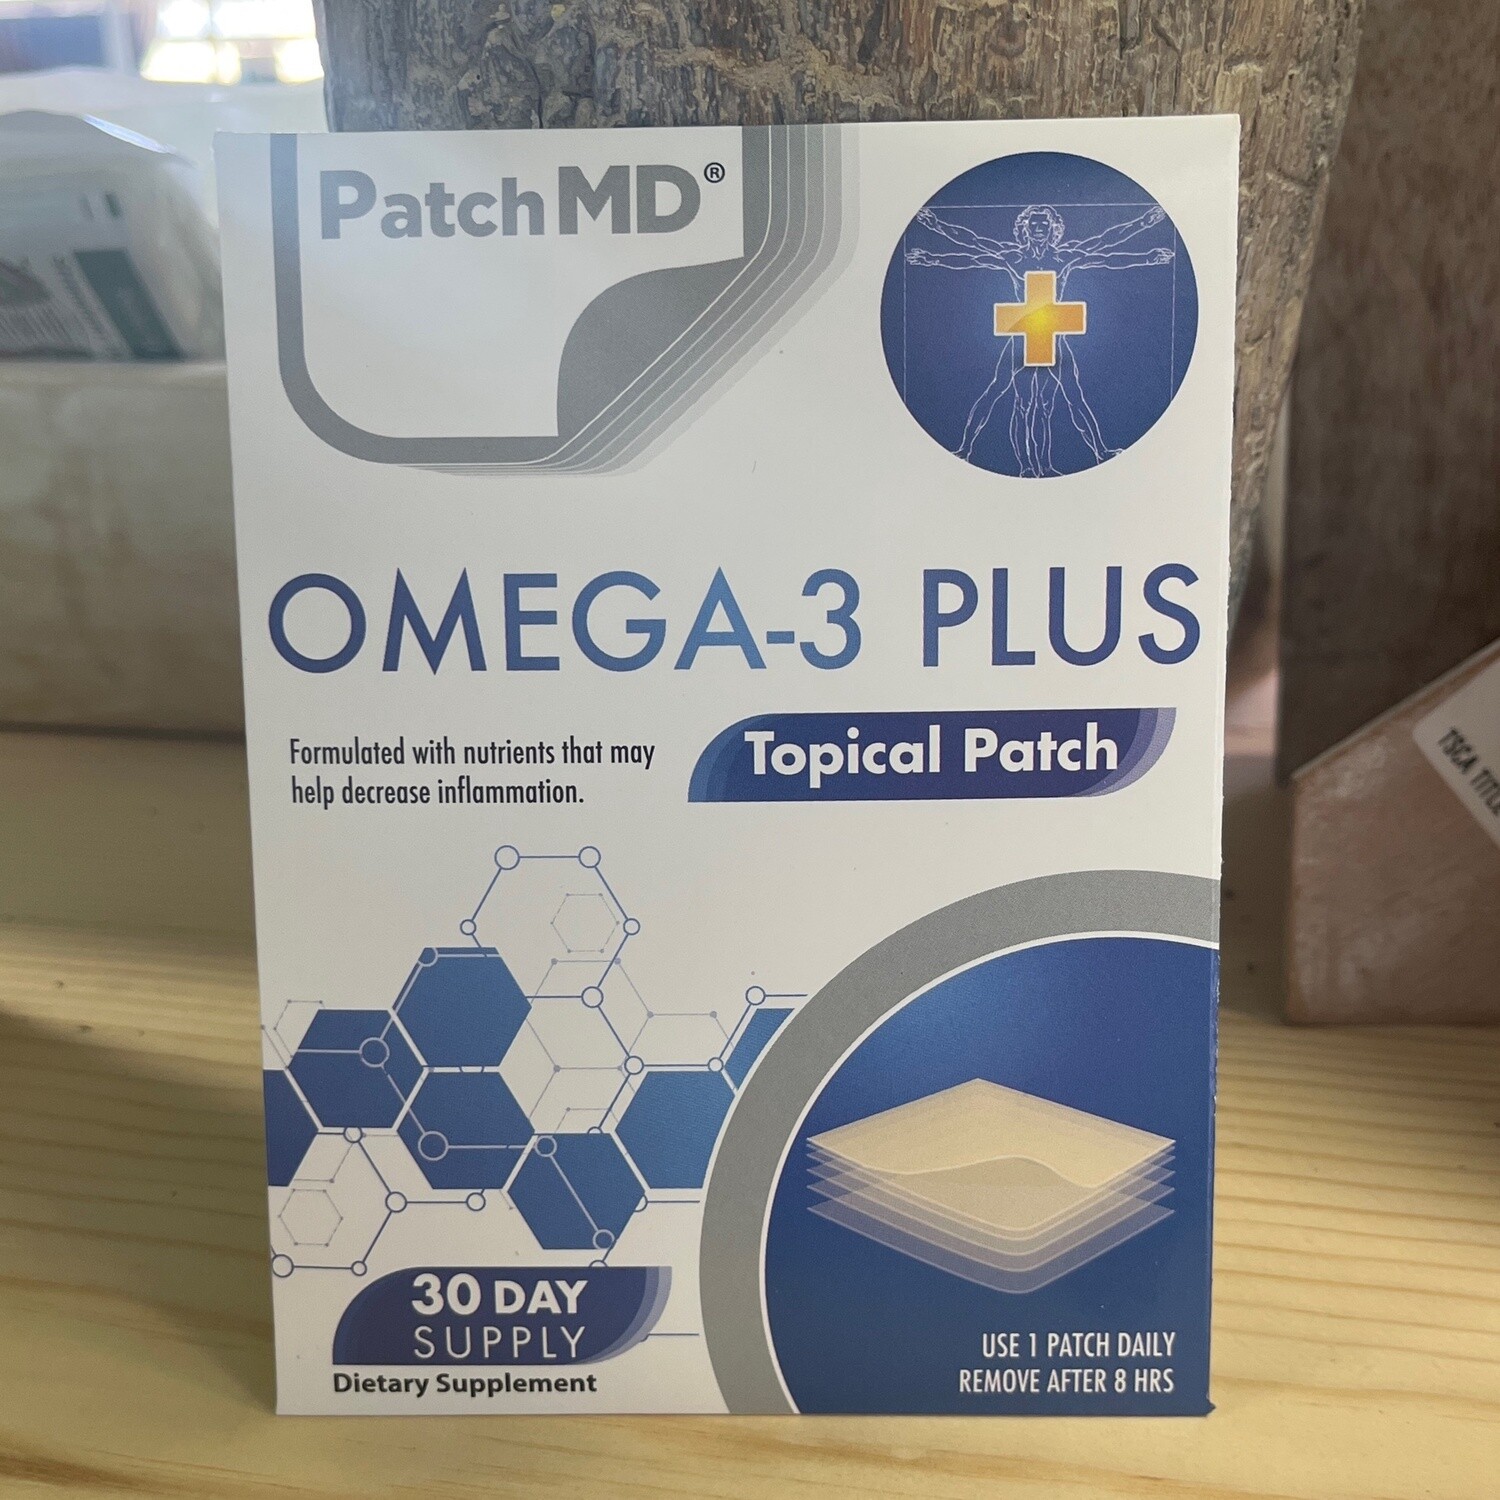 Omega 3 Plus Patch